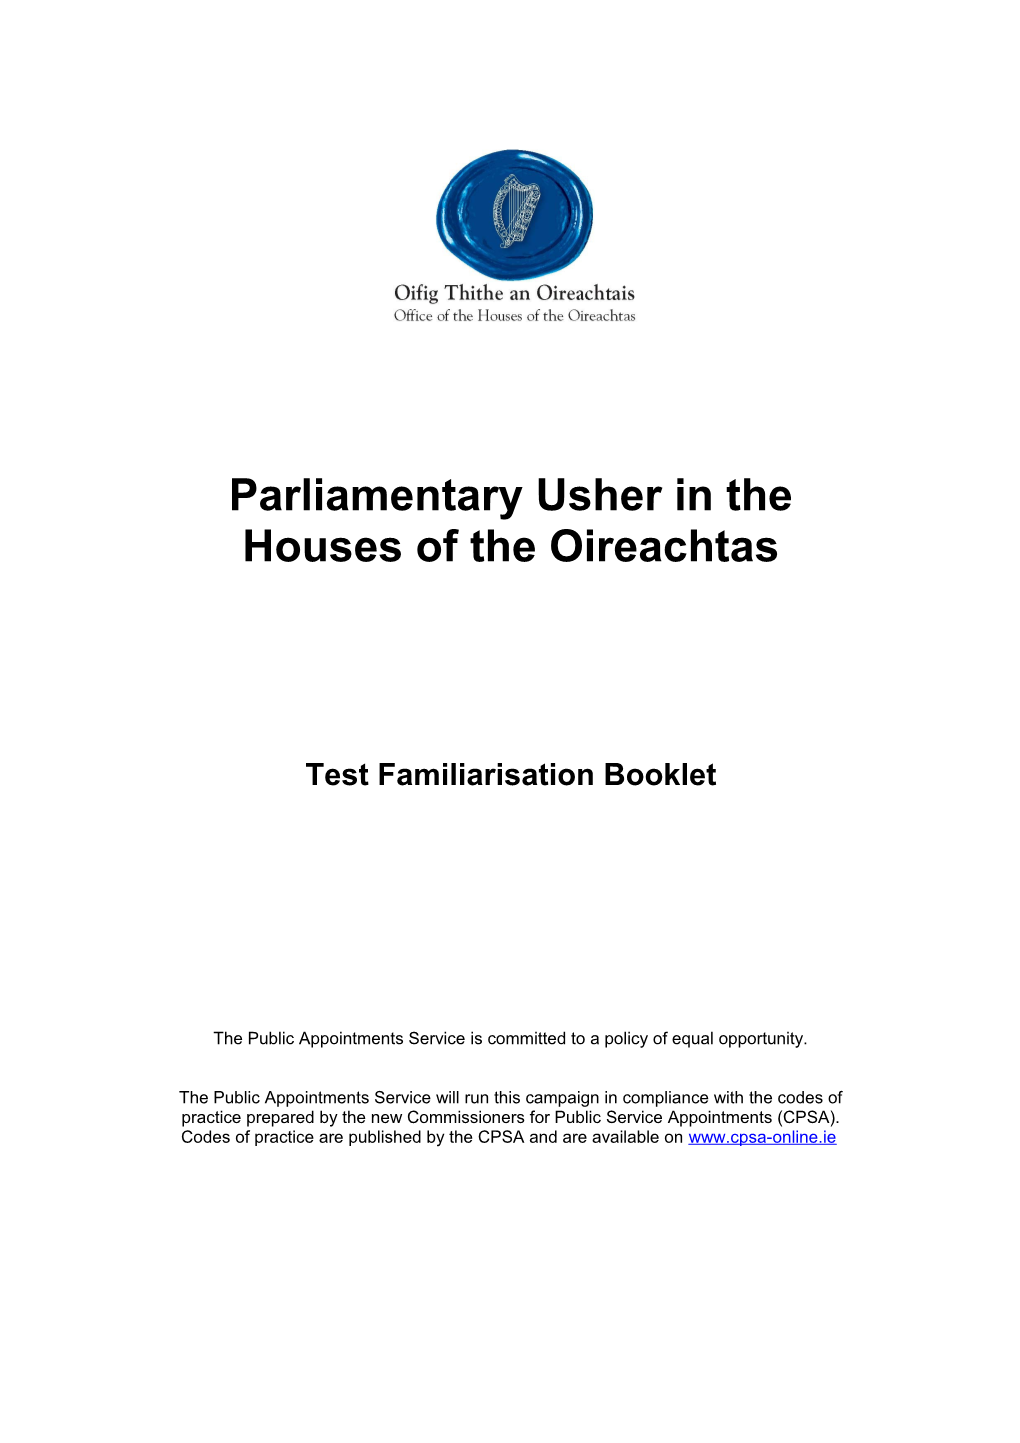 Parliamentary Usher in the Houses of the Oireachtas